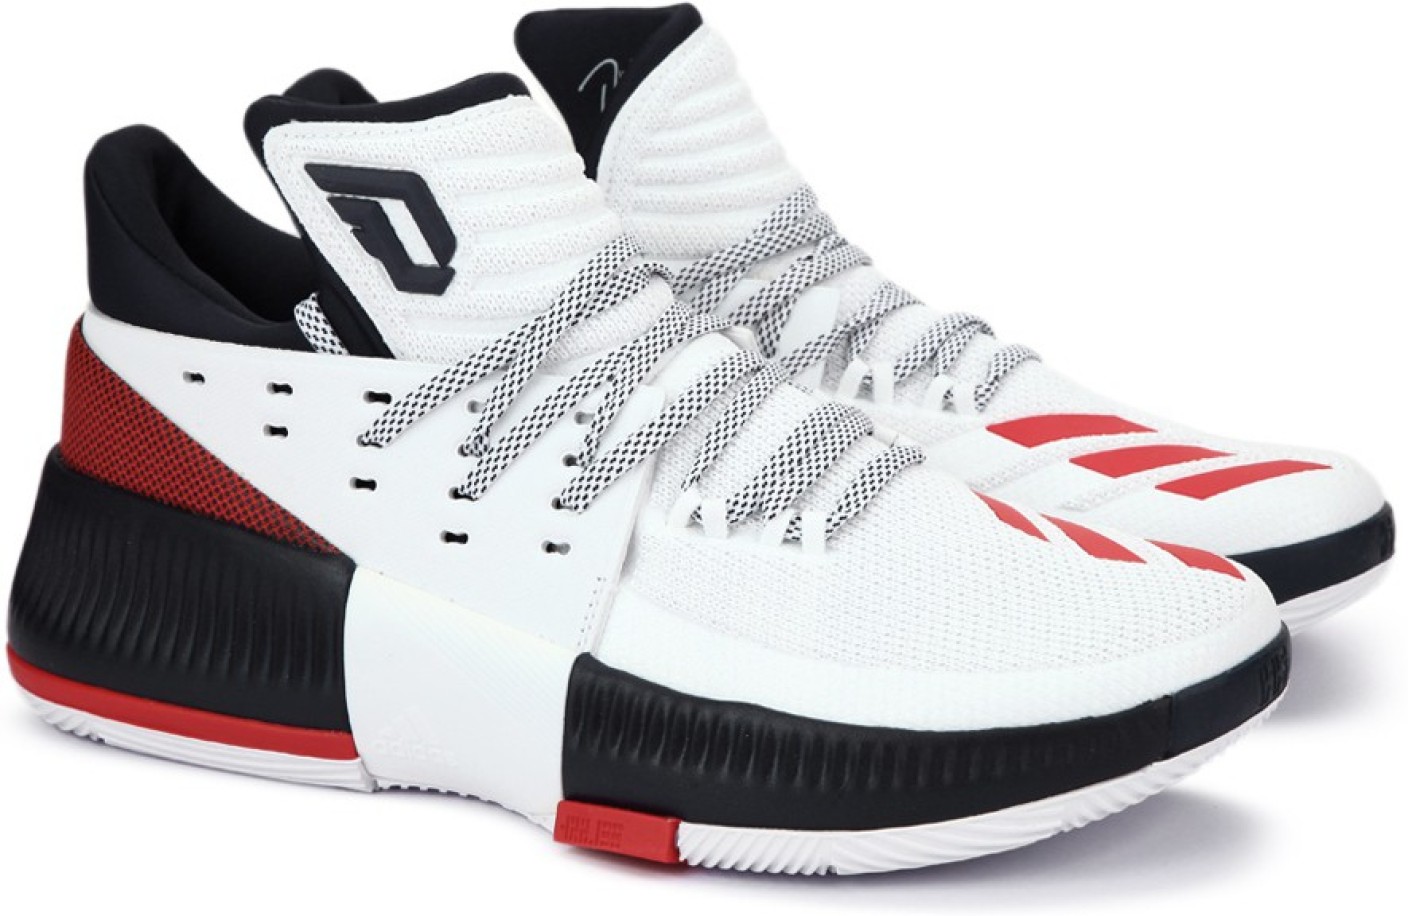 ADIDAS DAME 3 Basketball Shoes For Men - Buy FTWWHT/SCARLE/CONAVY Color ...